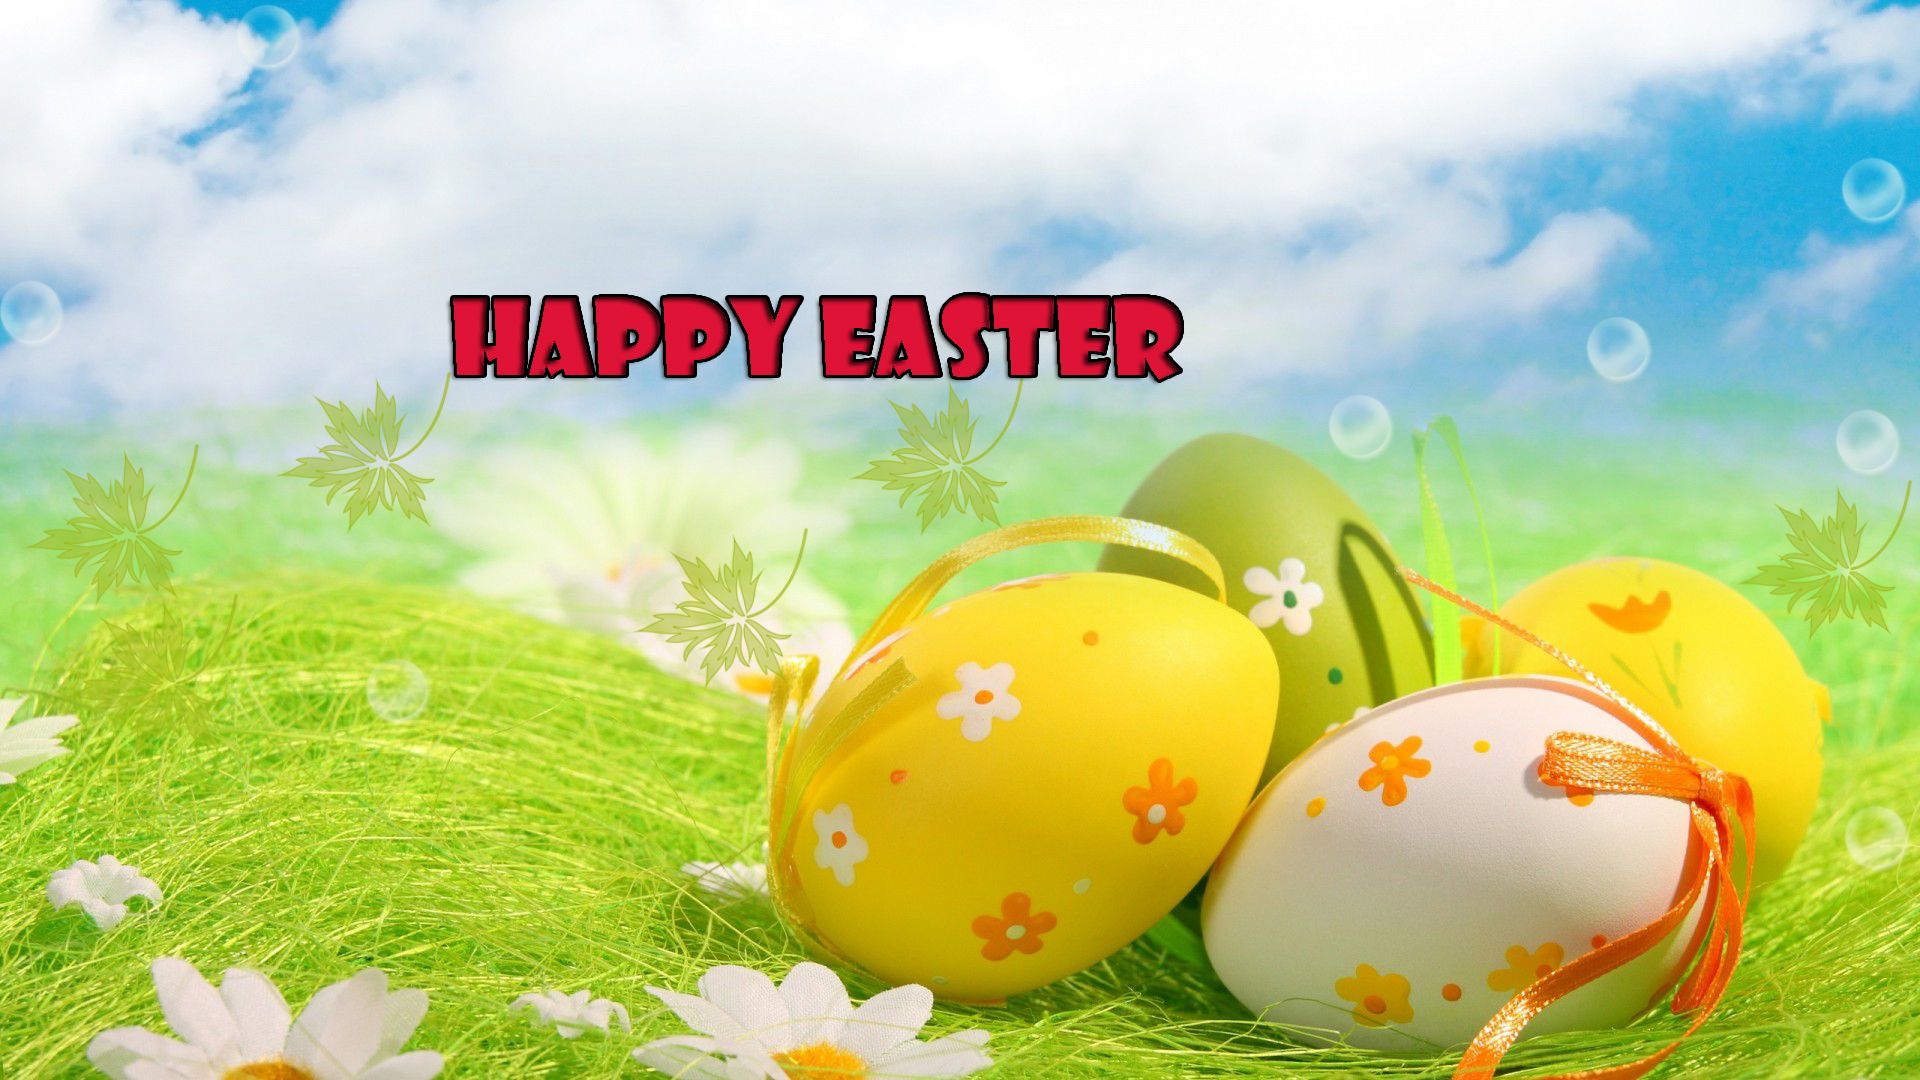 Happy Easter Image, Picture & HD Wallpaper 2018